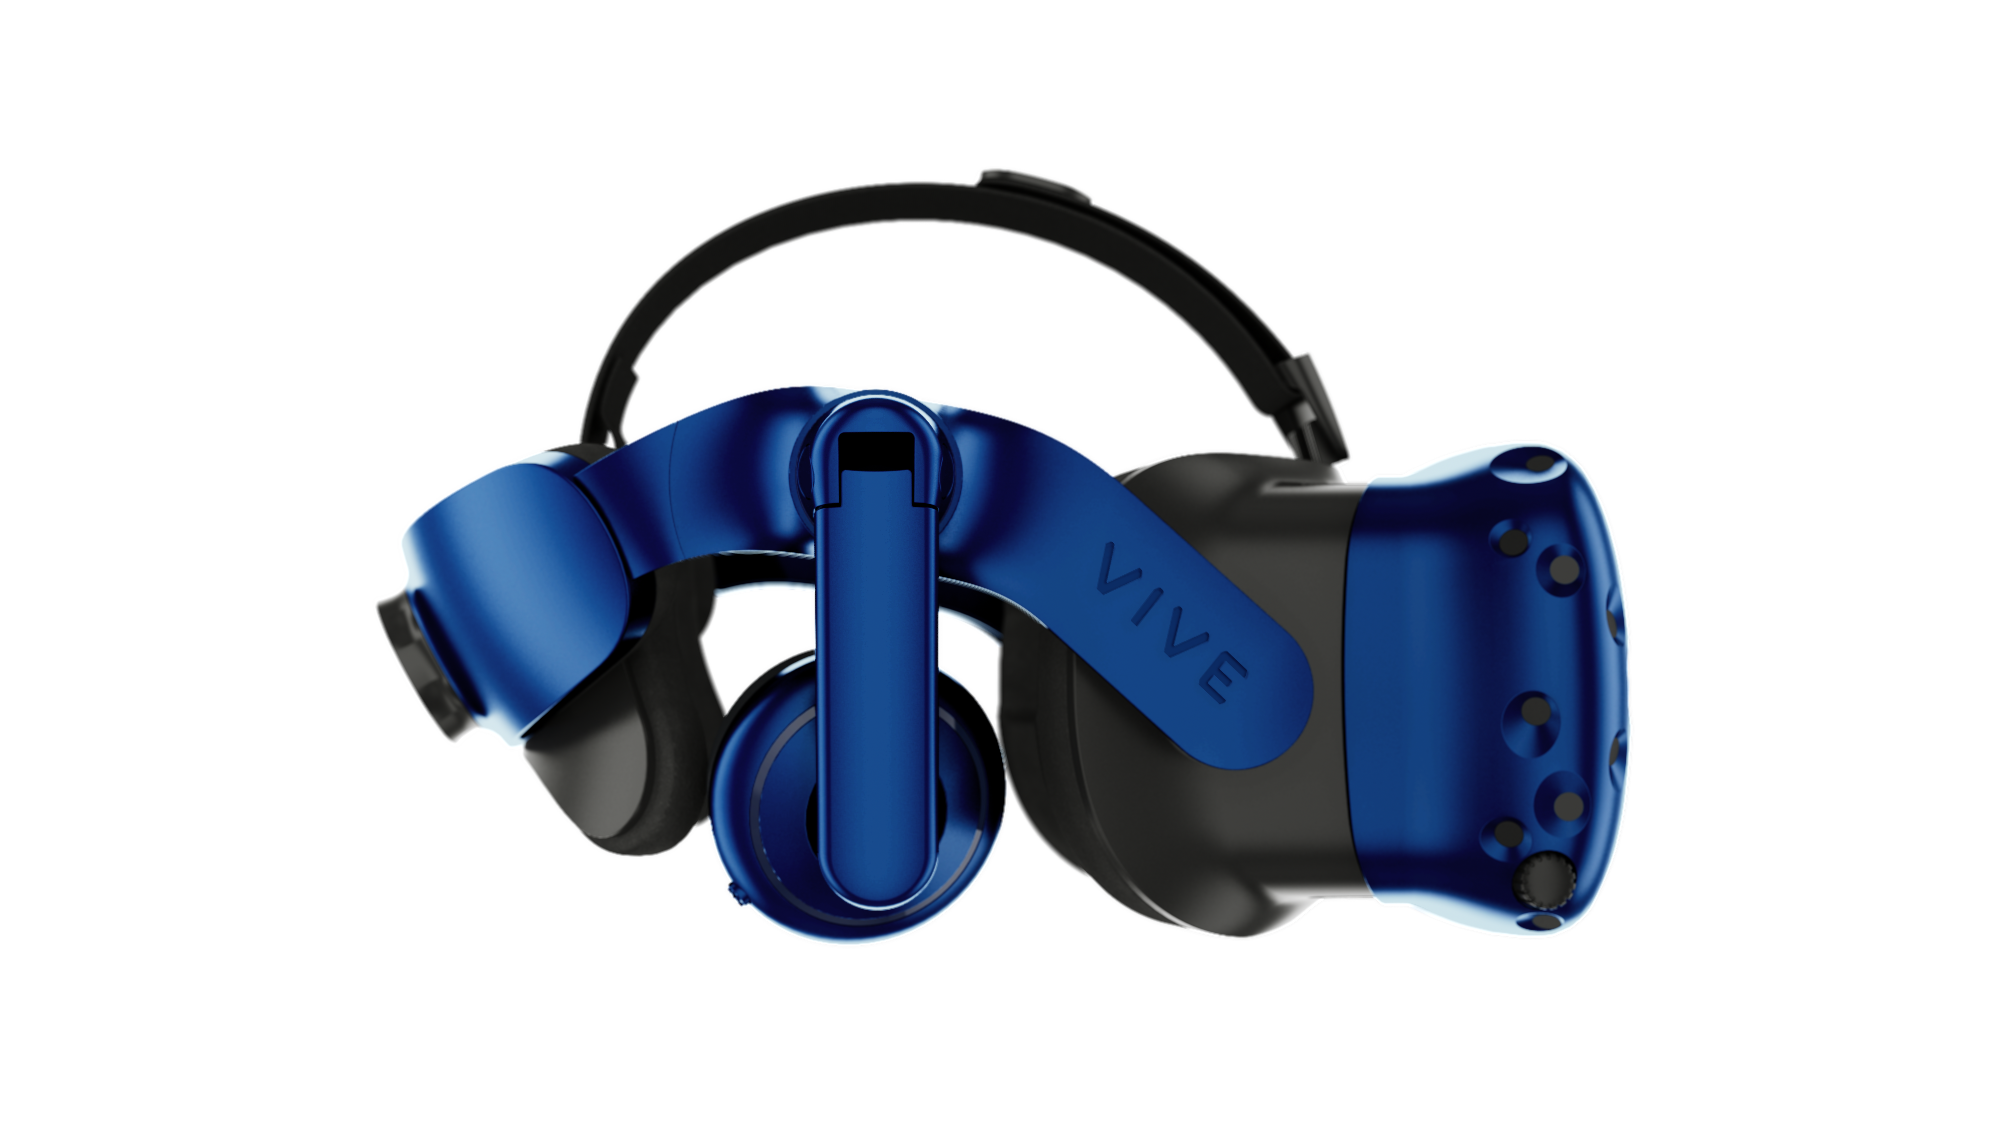 VR Takes The Next Step Forward With The Vive Pro And Vive Wireless Adaptor